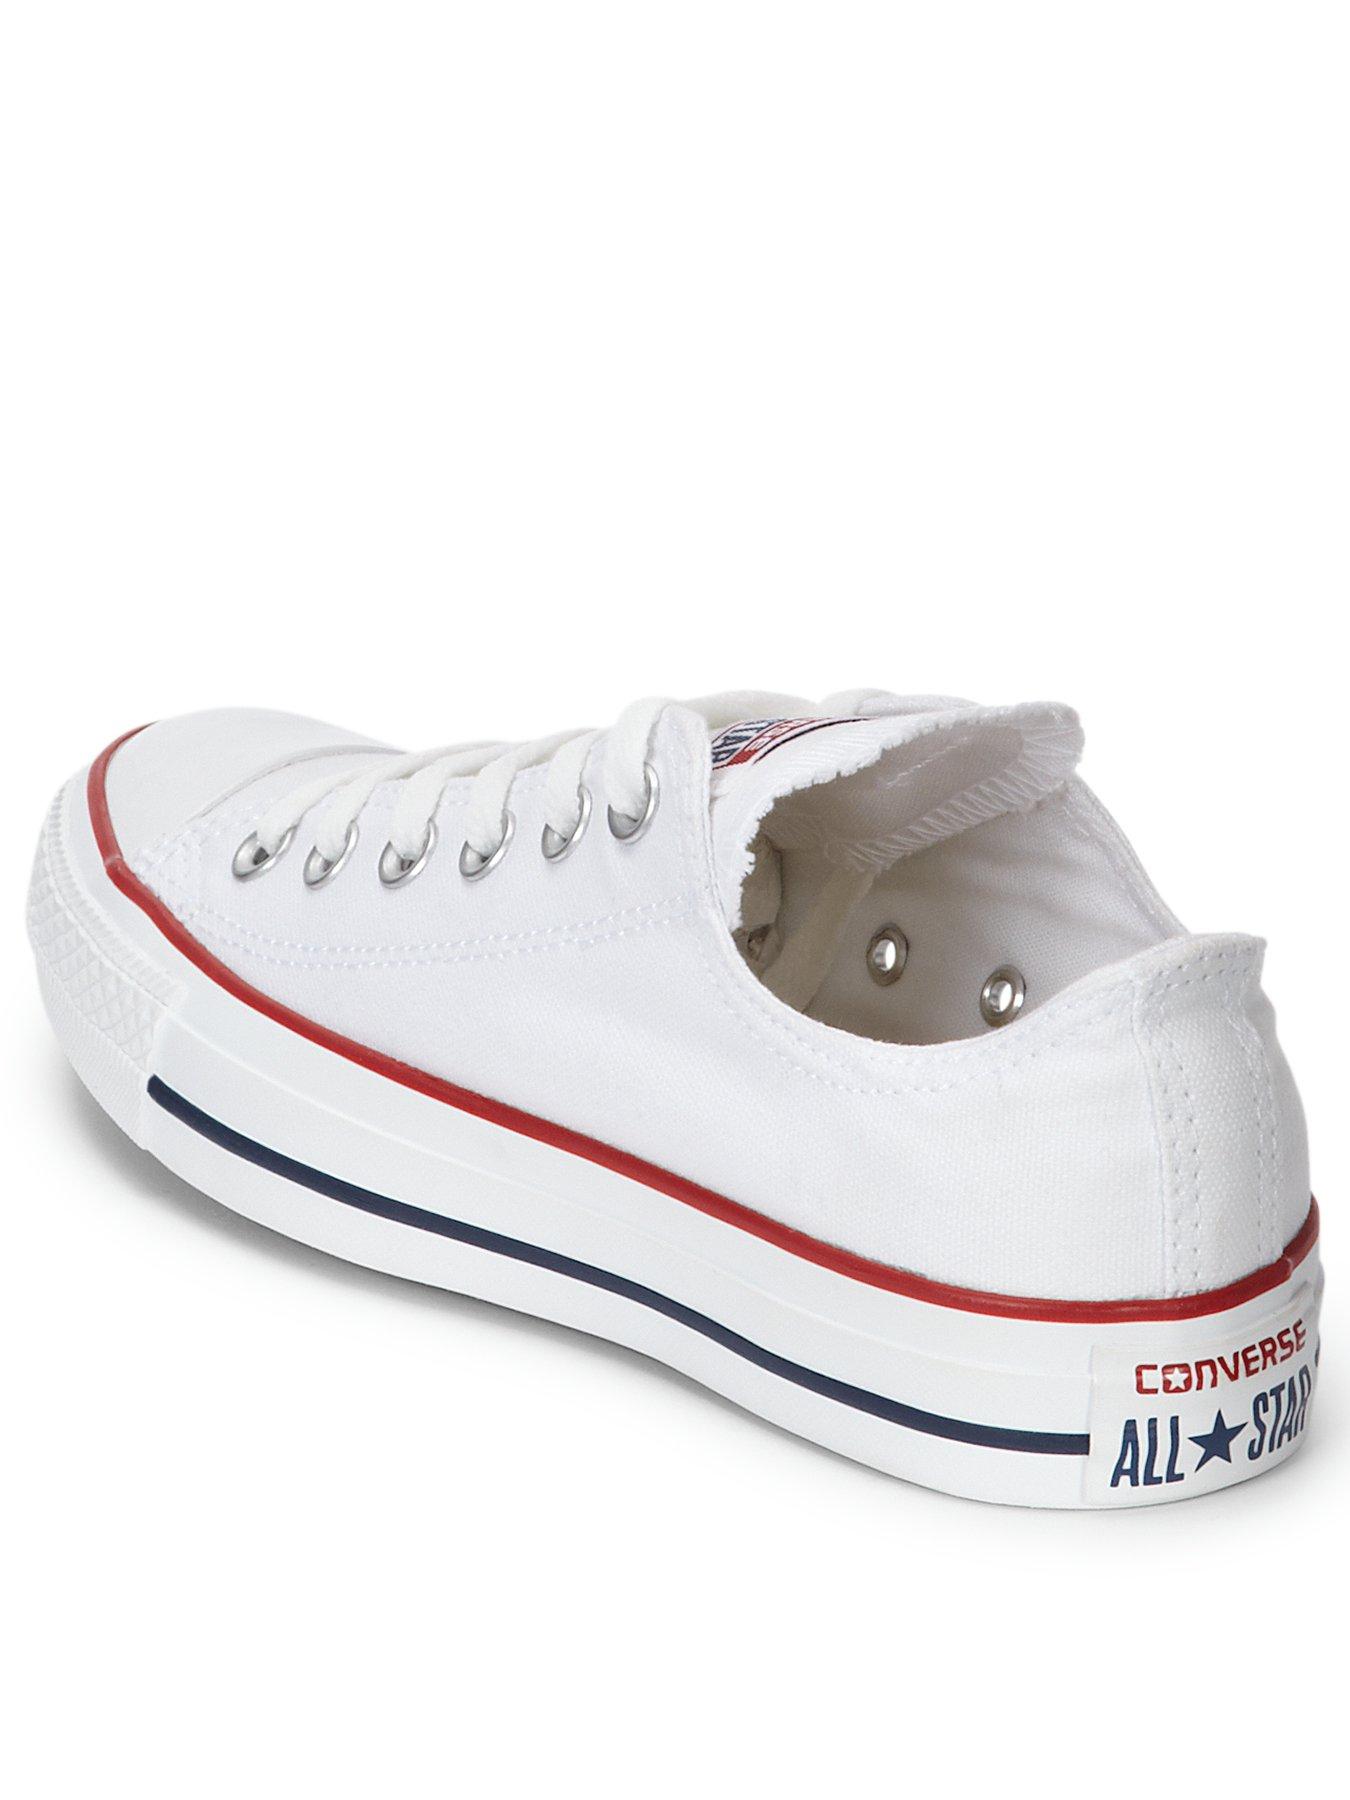 Women Chuck Taylor All Star Ox Wide Fit - White